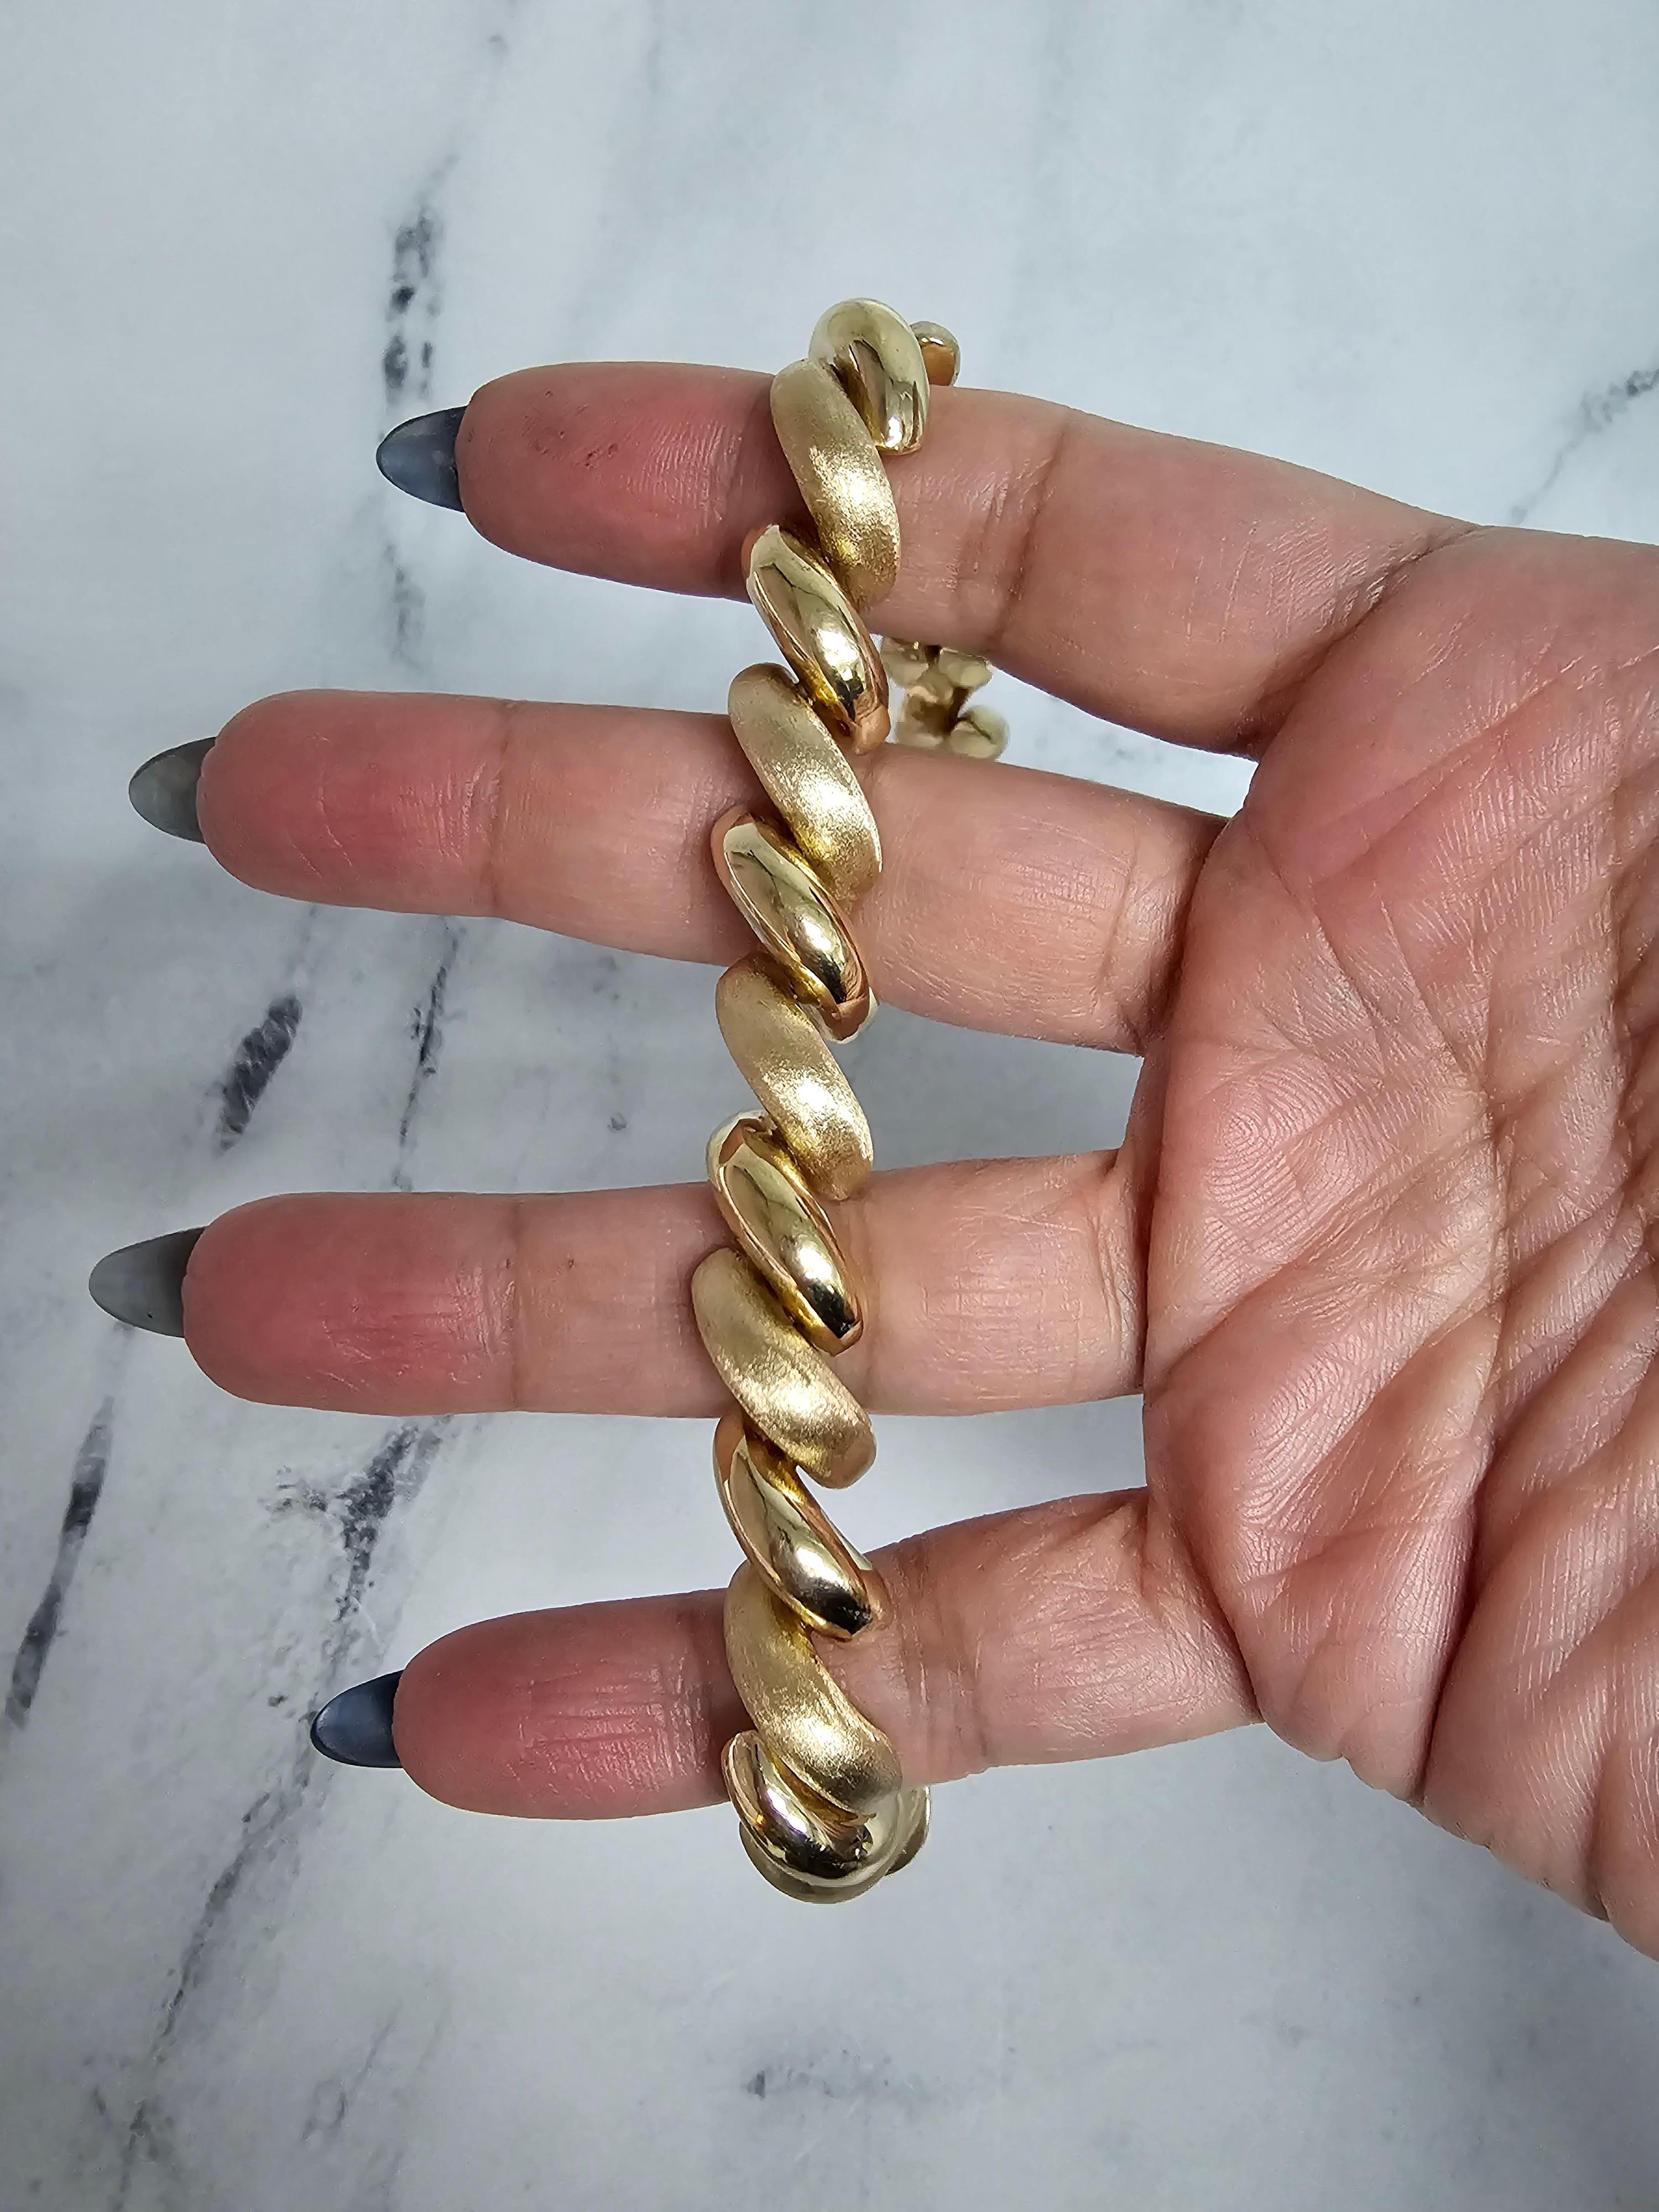 ♥ Product Summary ♥

Metal: 14k Yellow Gold 
Weight: 26 grams 
Length: 8 inches
Dimensions: 11MM